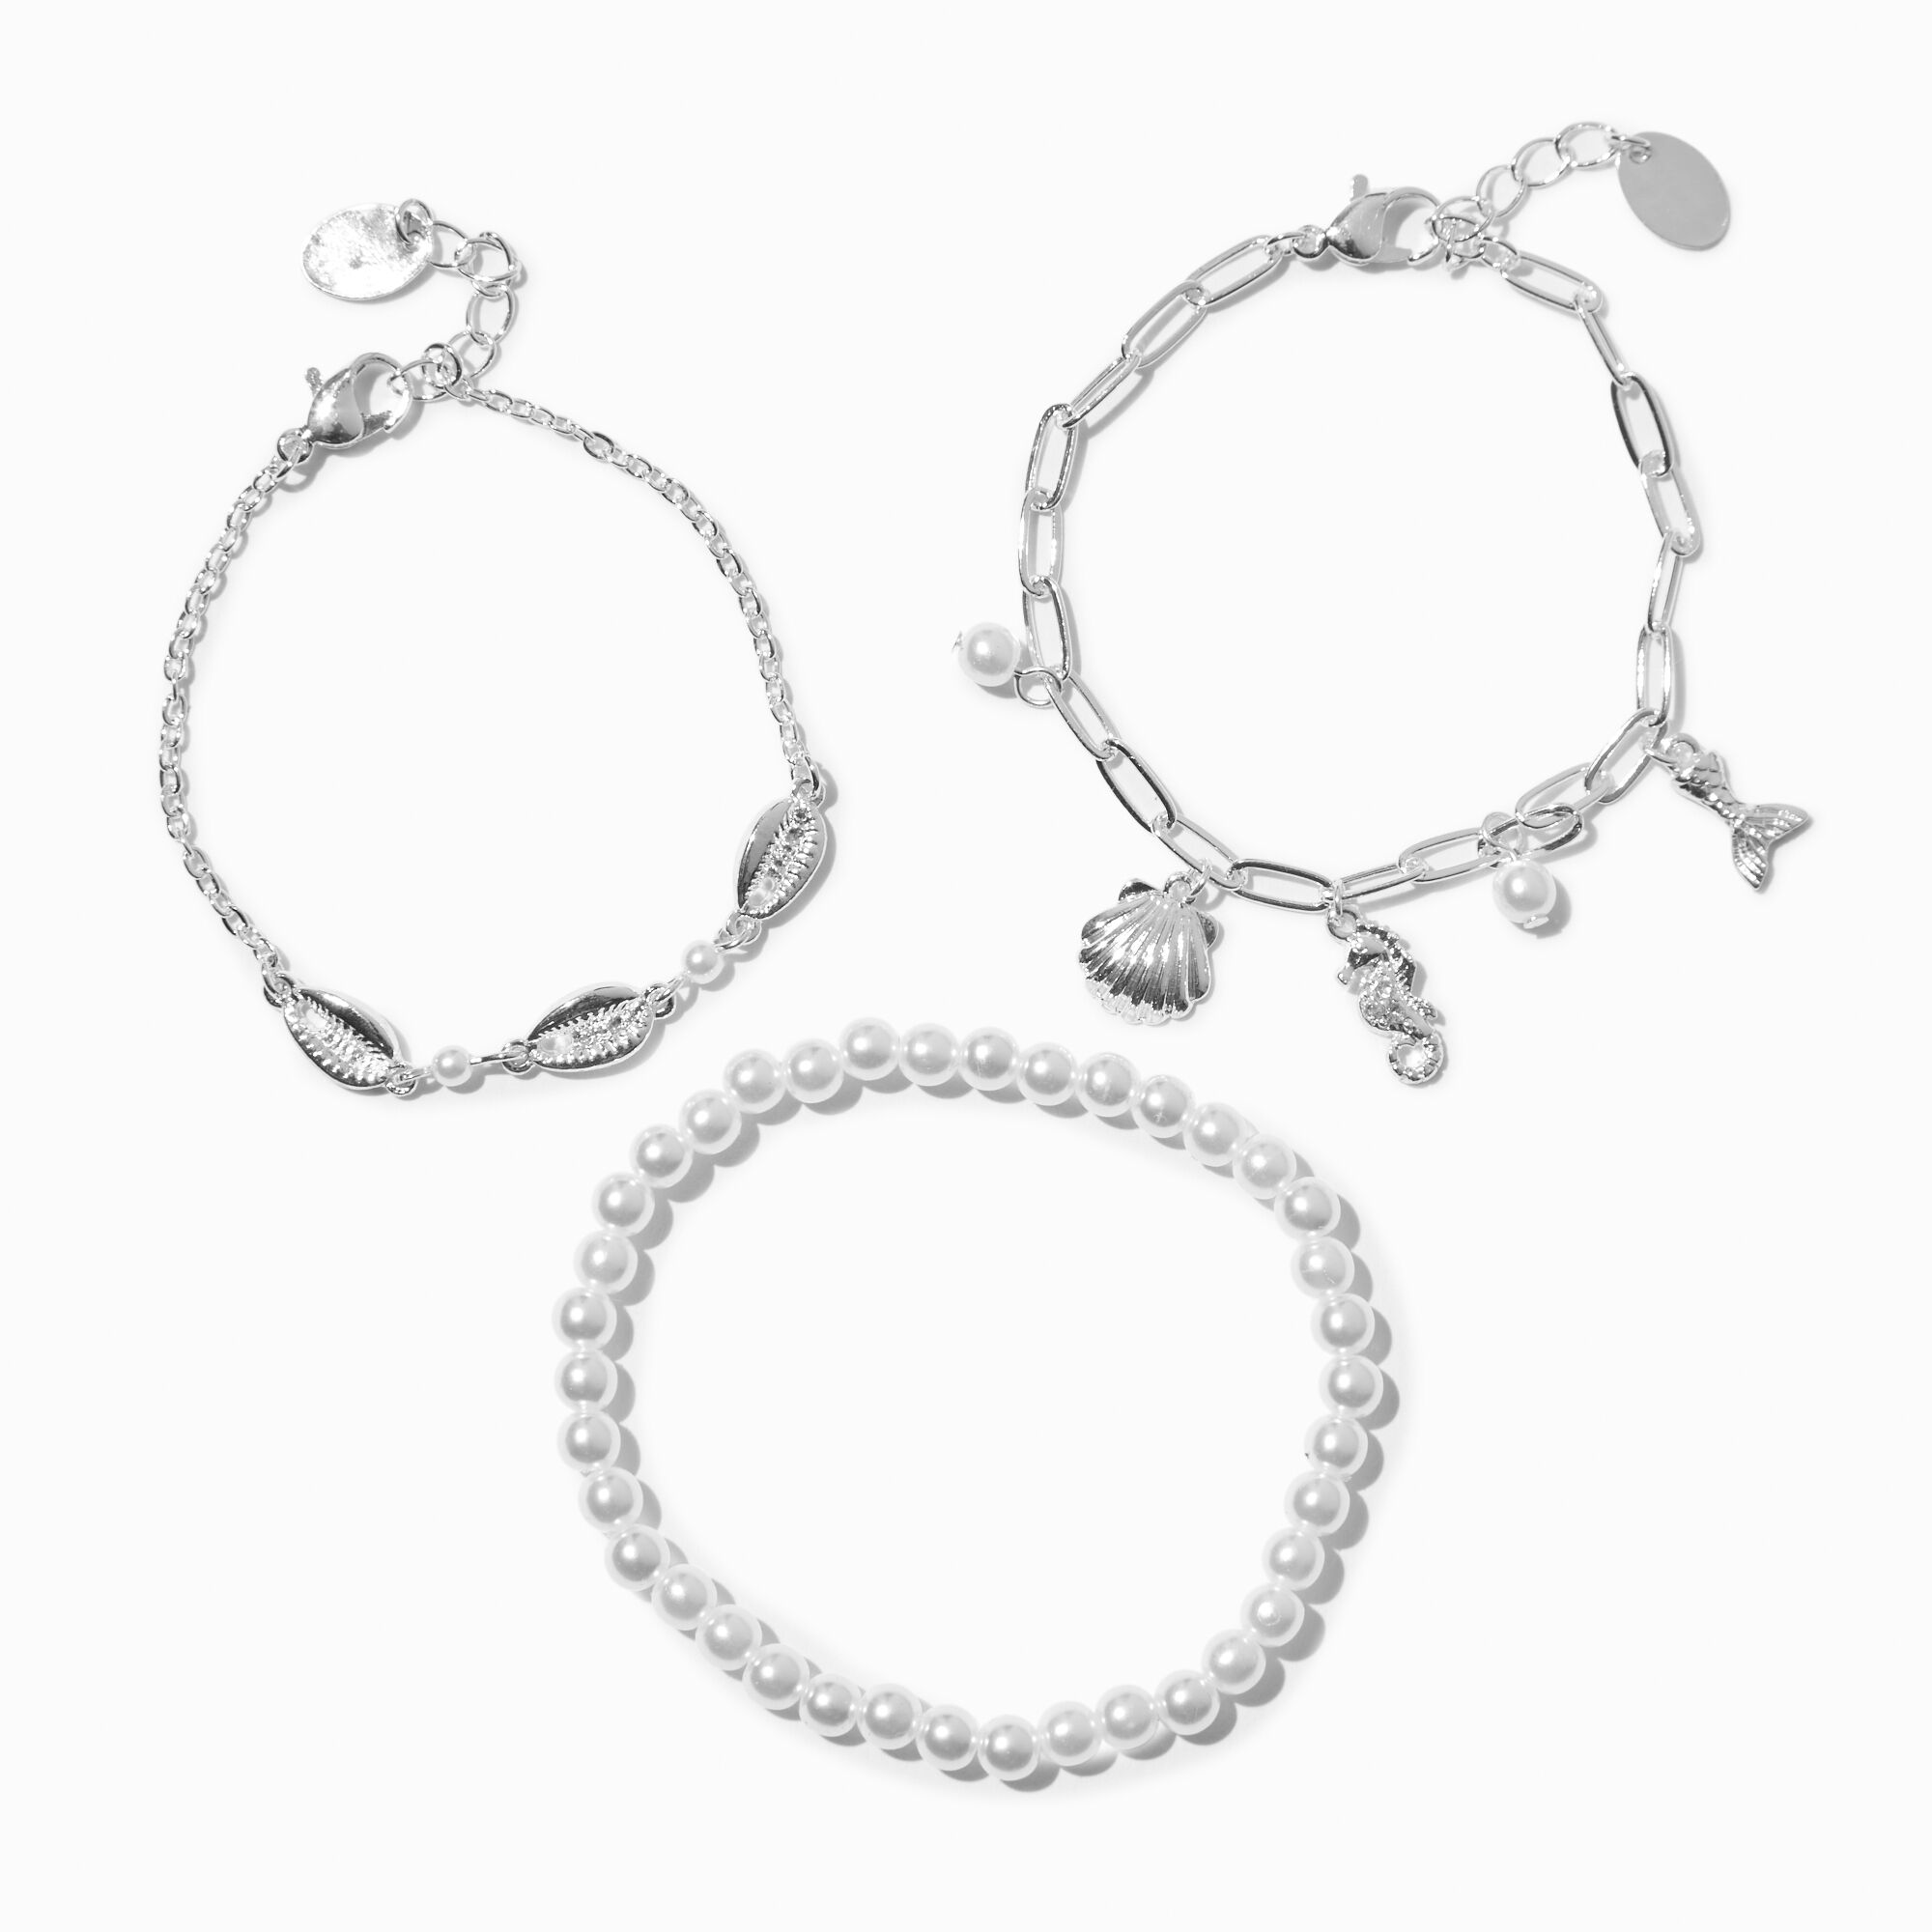 View Claires Club Sea Critter Chain Bracelets 3 Pack Silver information